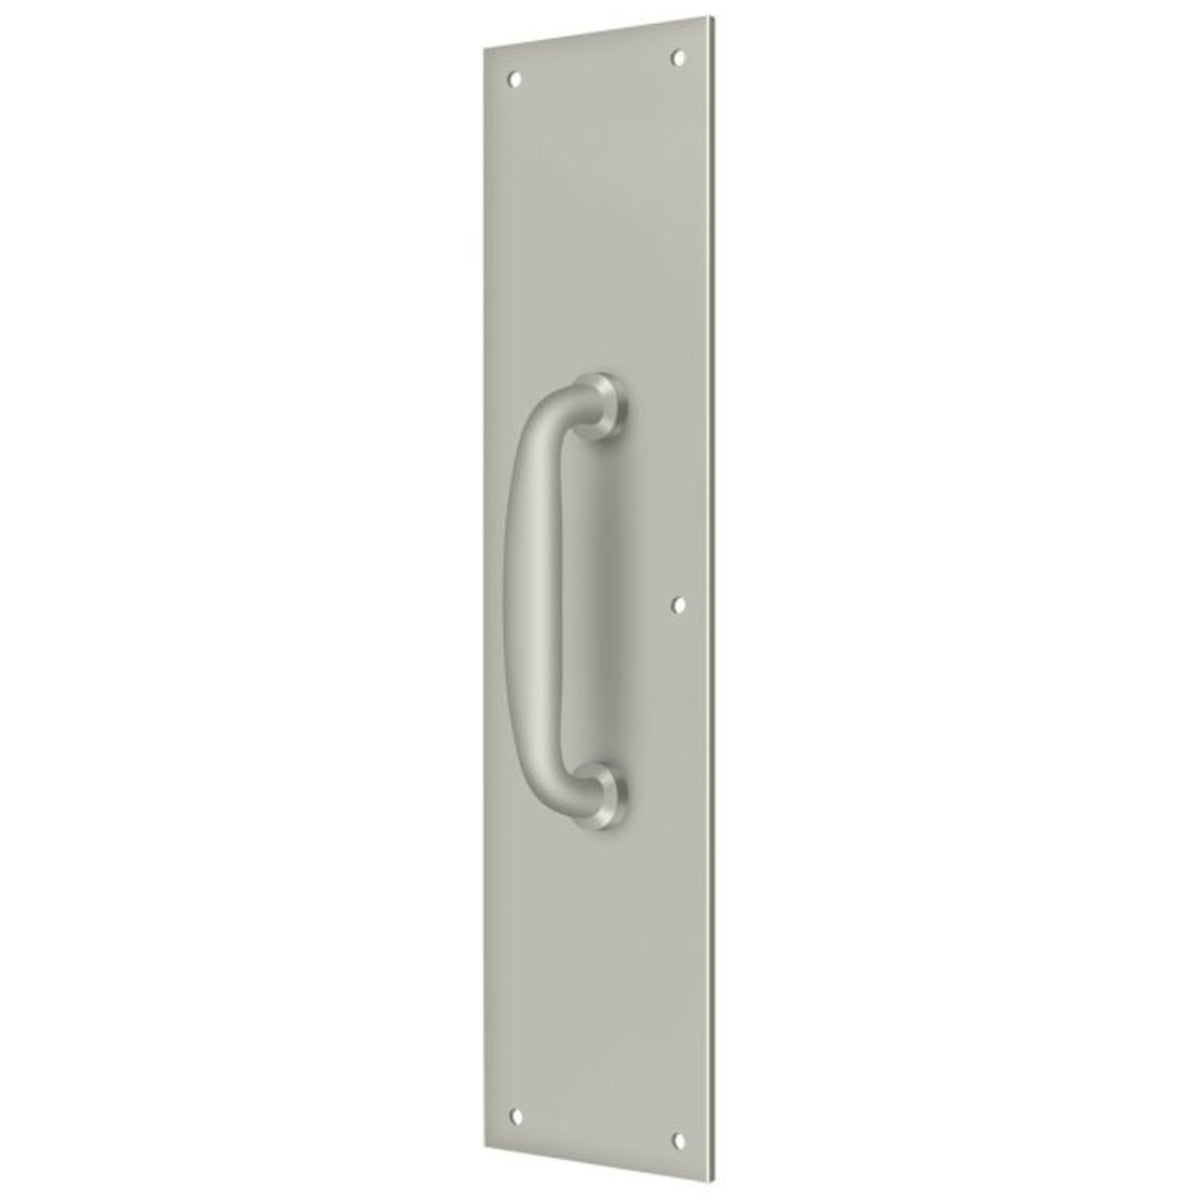 Deltana PPH55U15 Push Plate With Handle, Satin Nickel